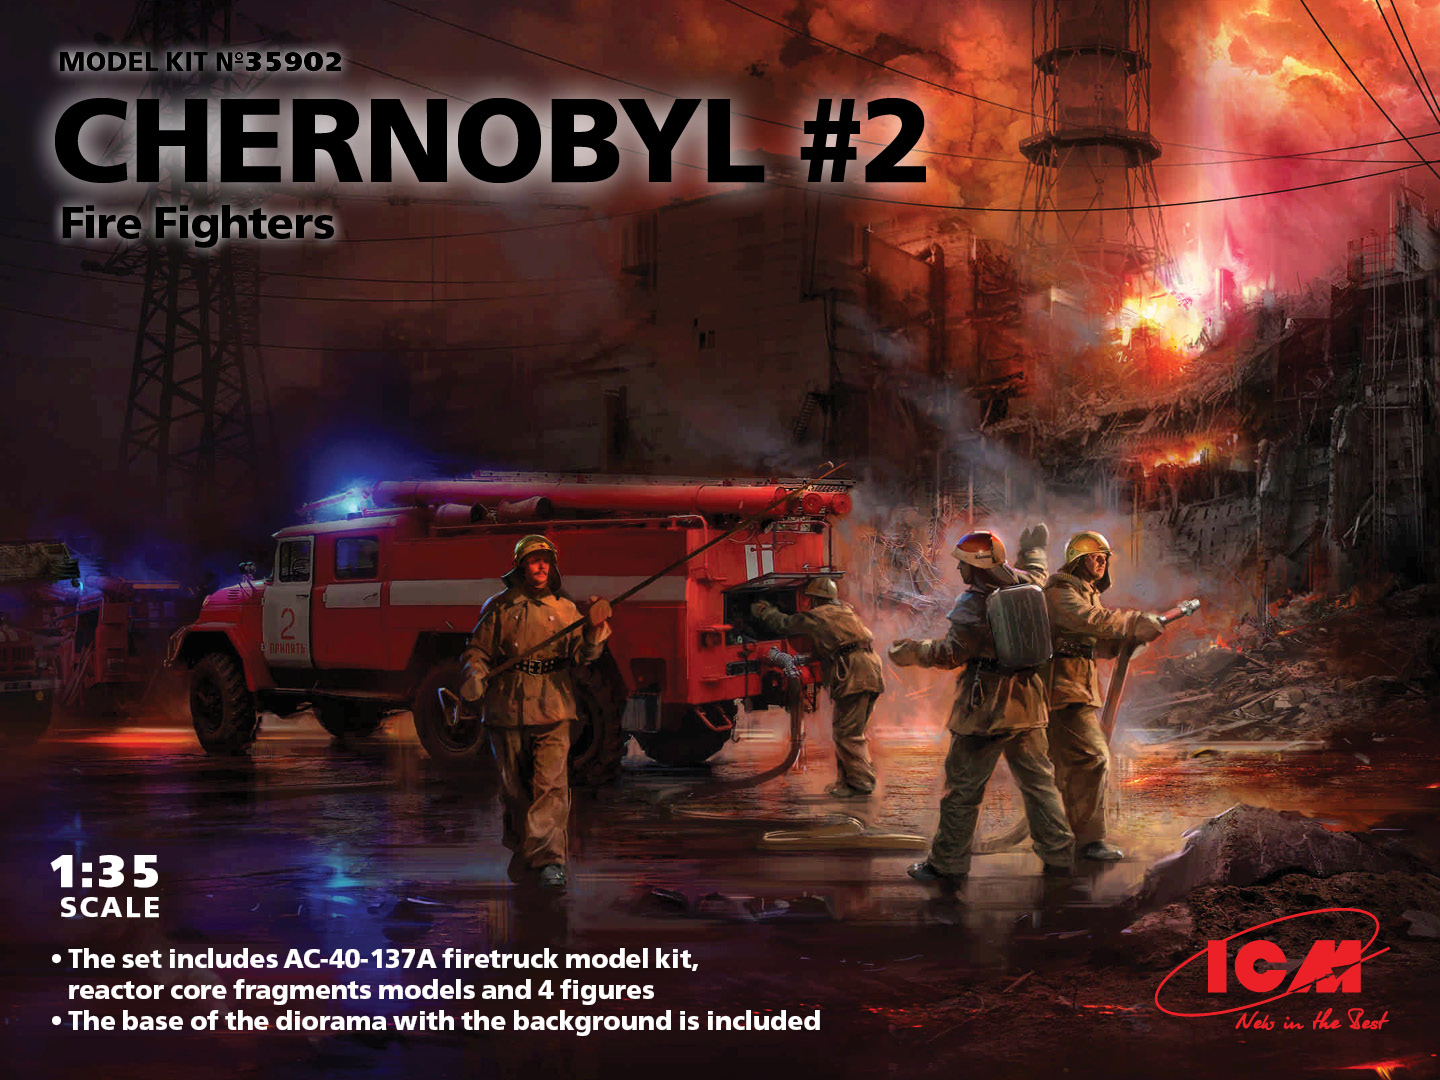 Chernobyl#2. Fire Fighters